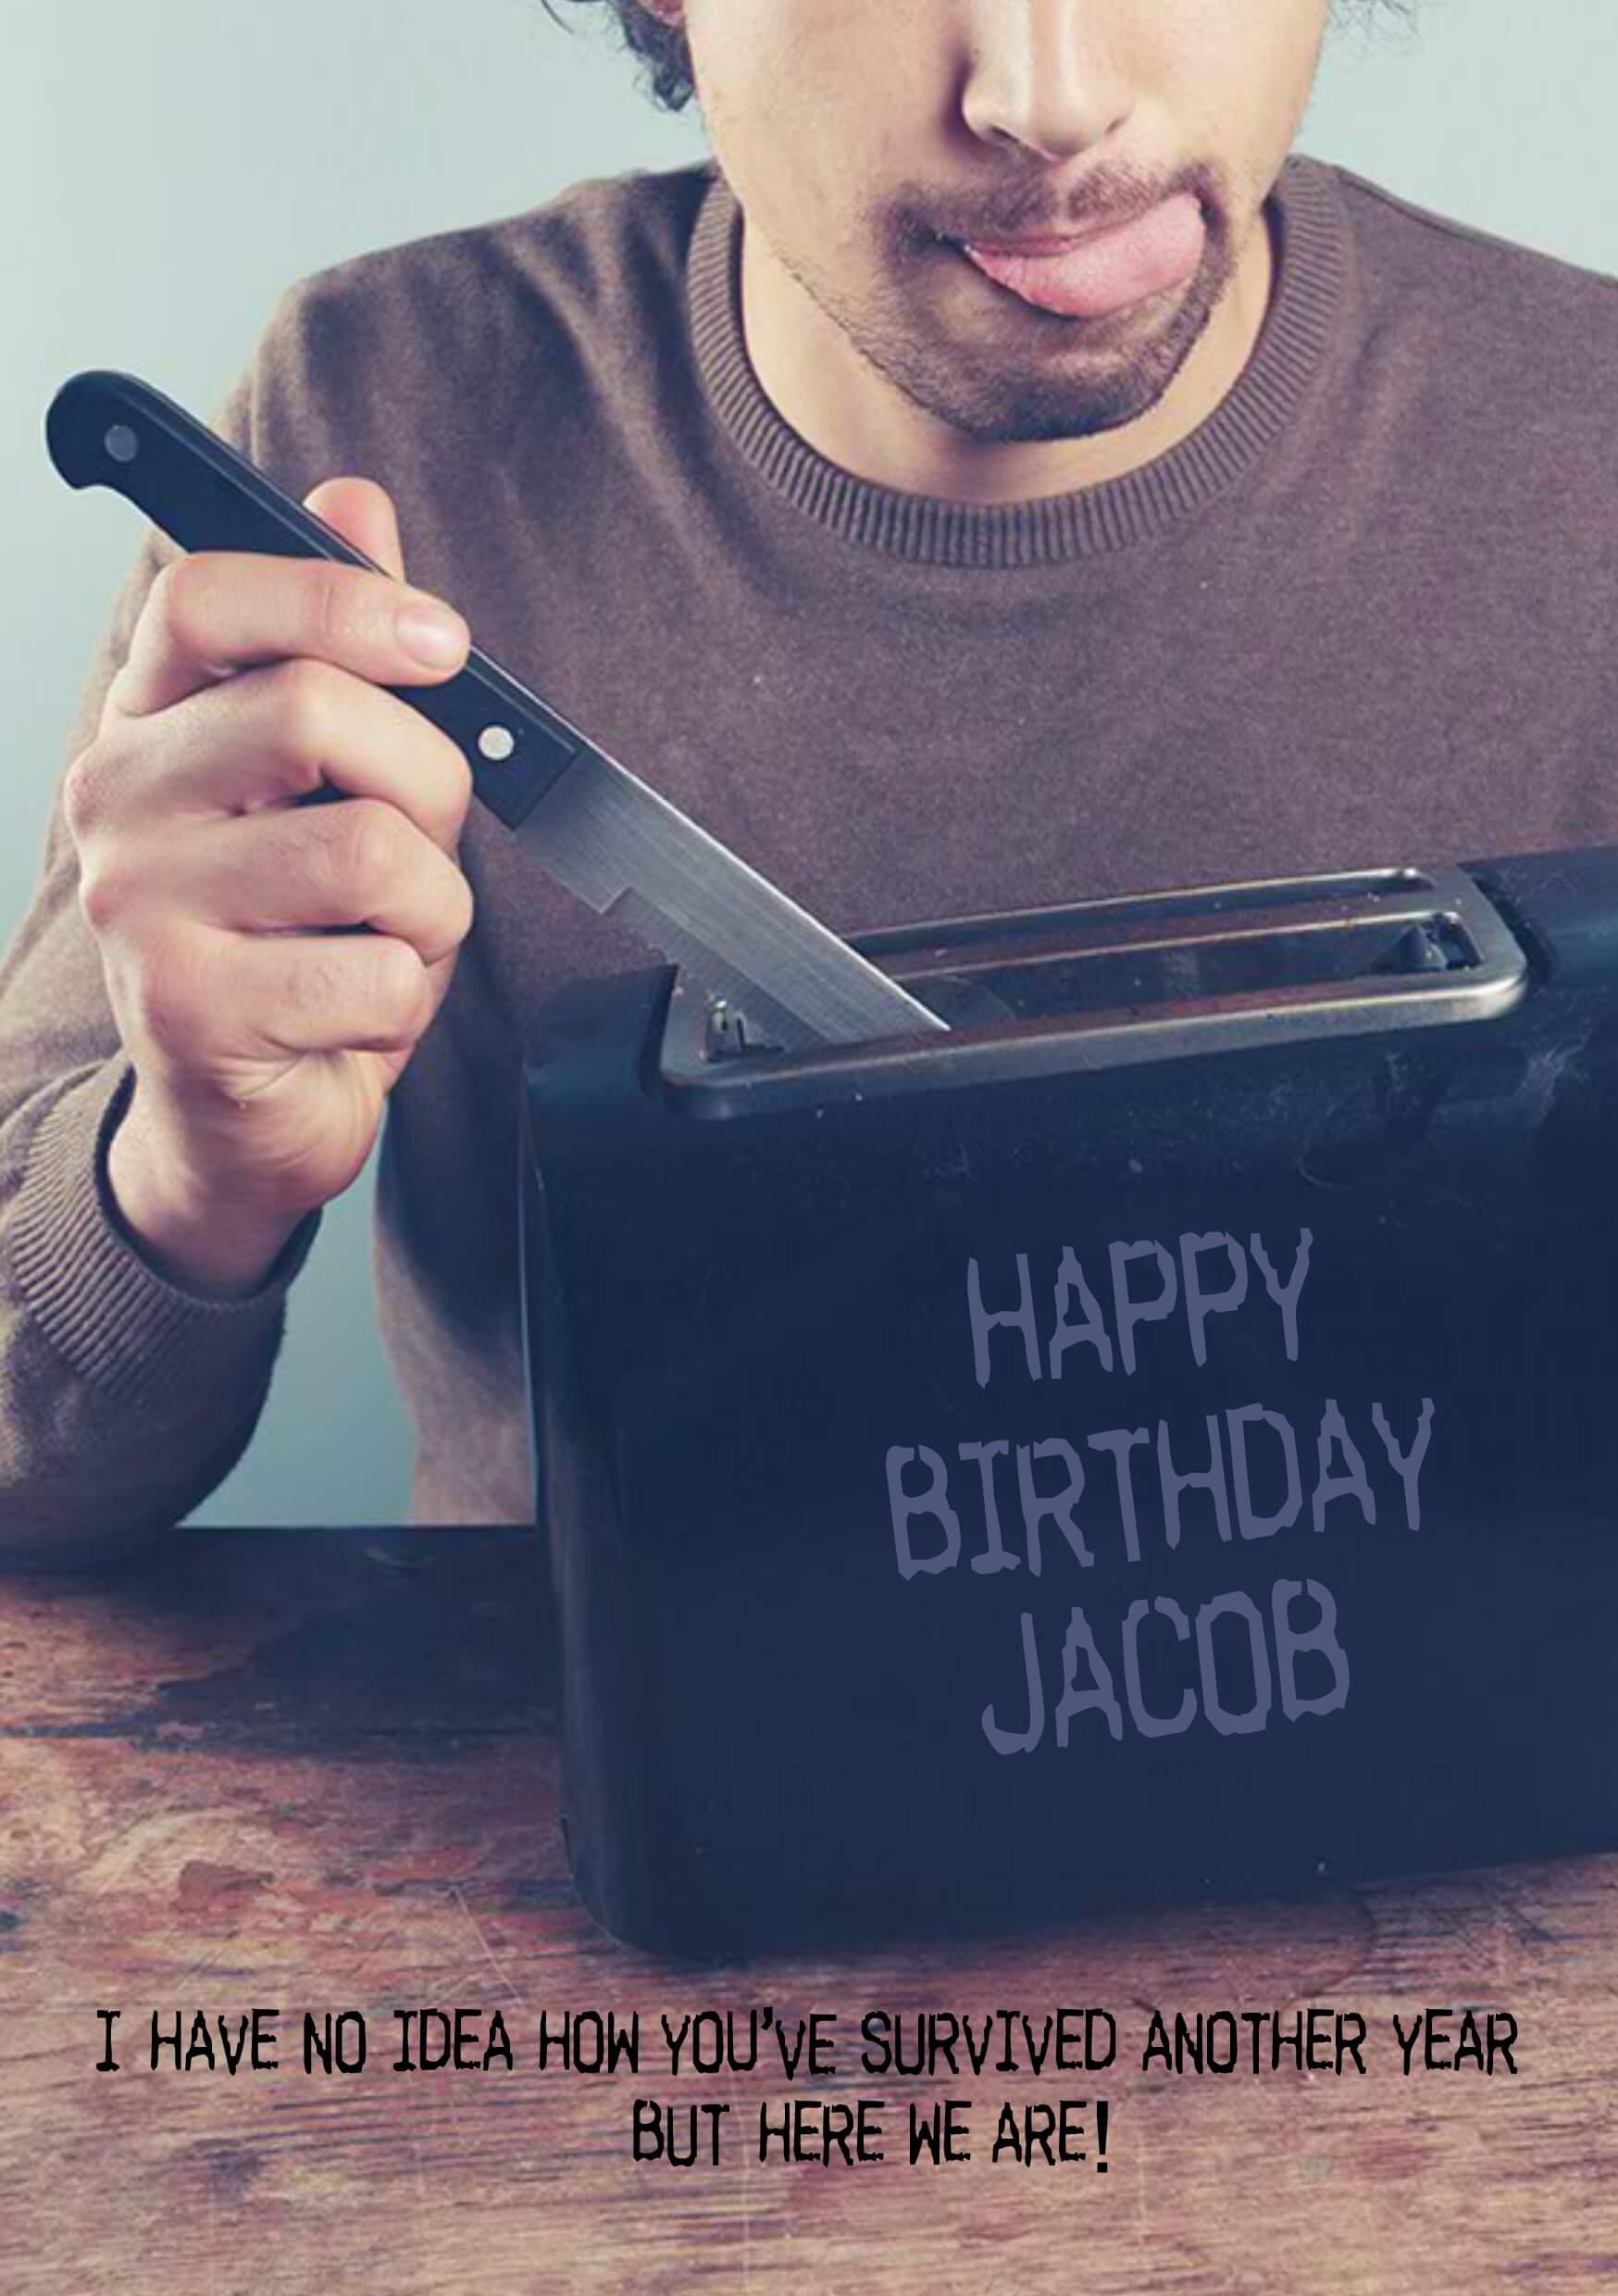 A man holding a Another Year Jacob toaster in a Twisted Gifts Greeting Card.